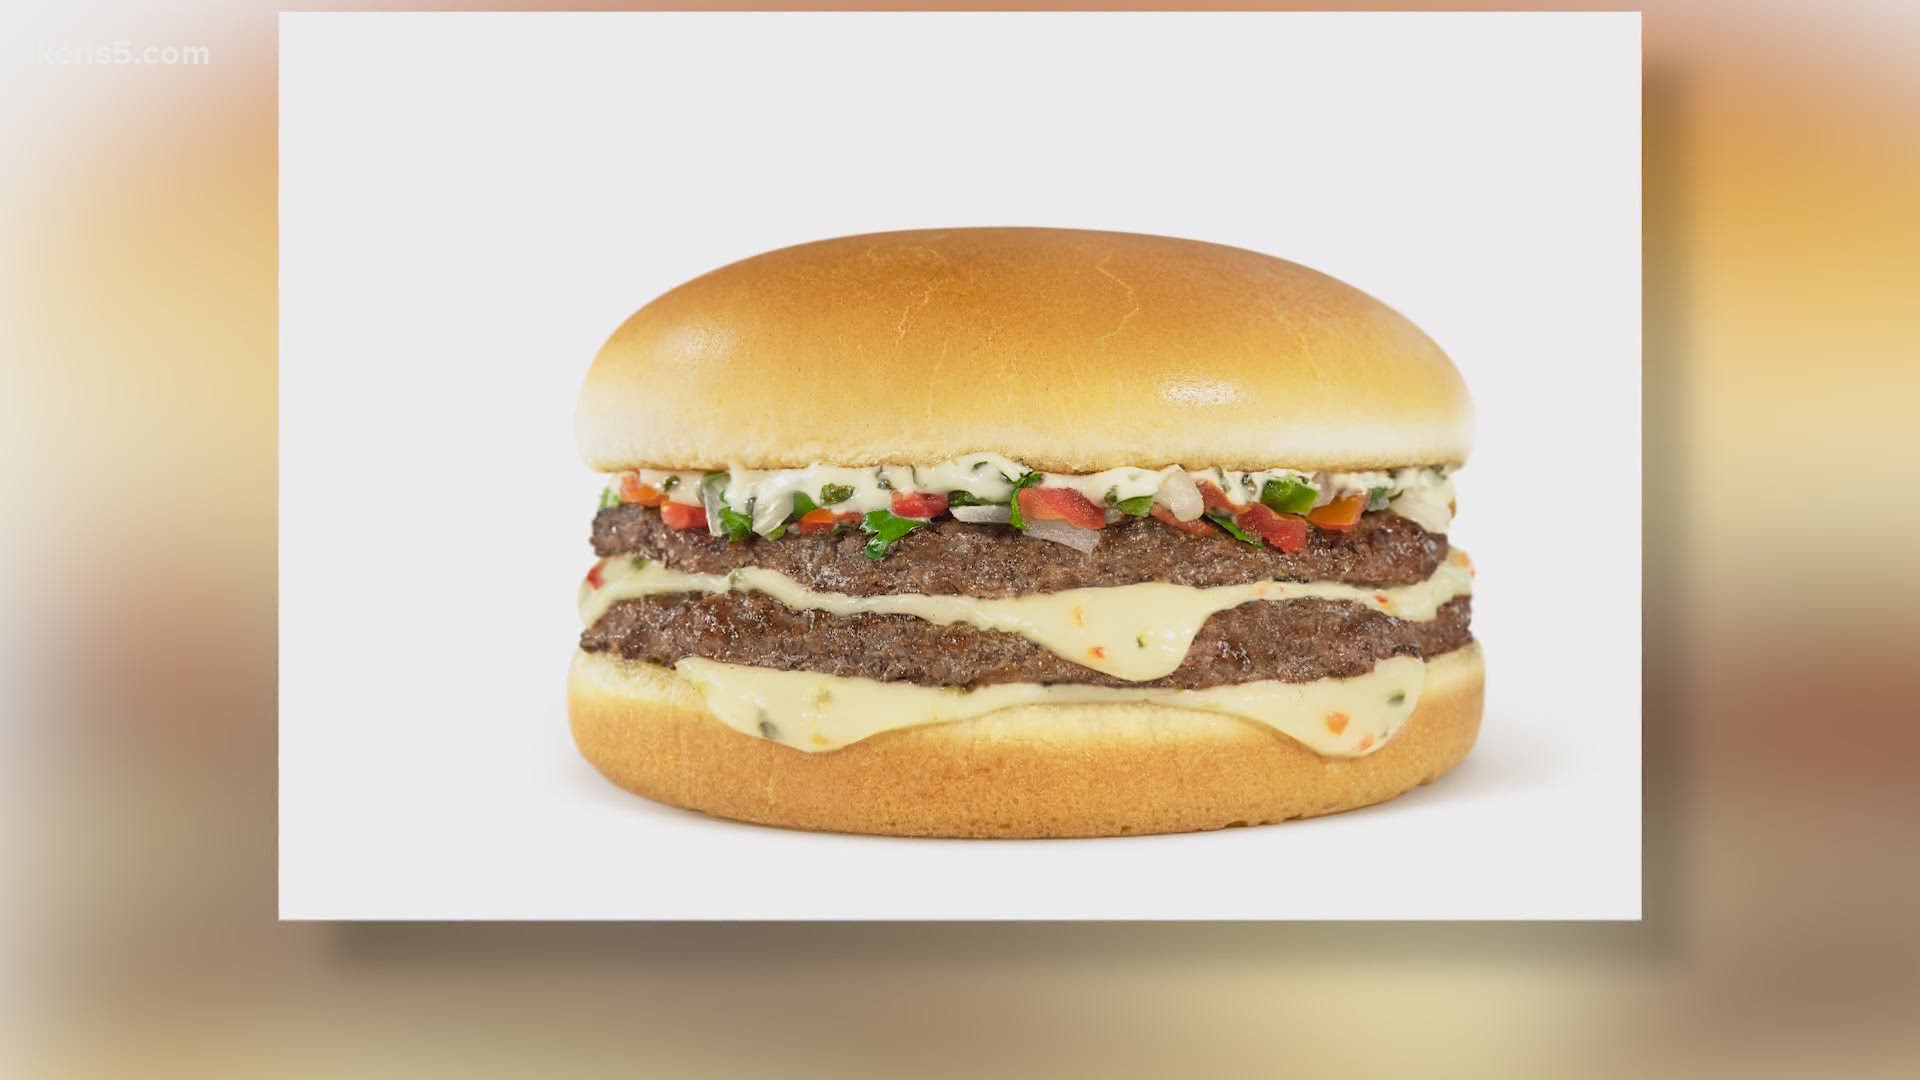 Whataburger gets in the game as official burger of the Dallas